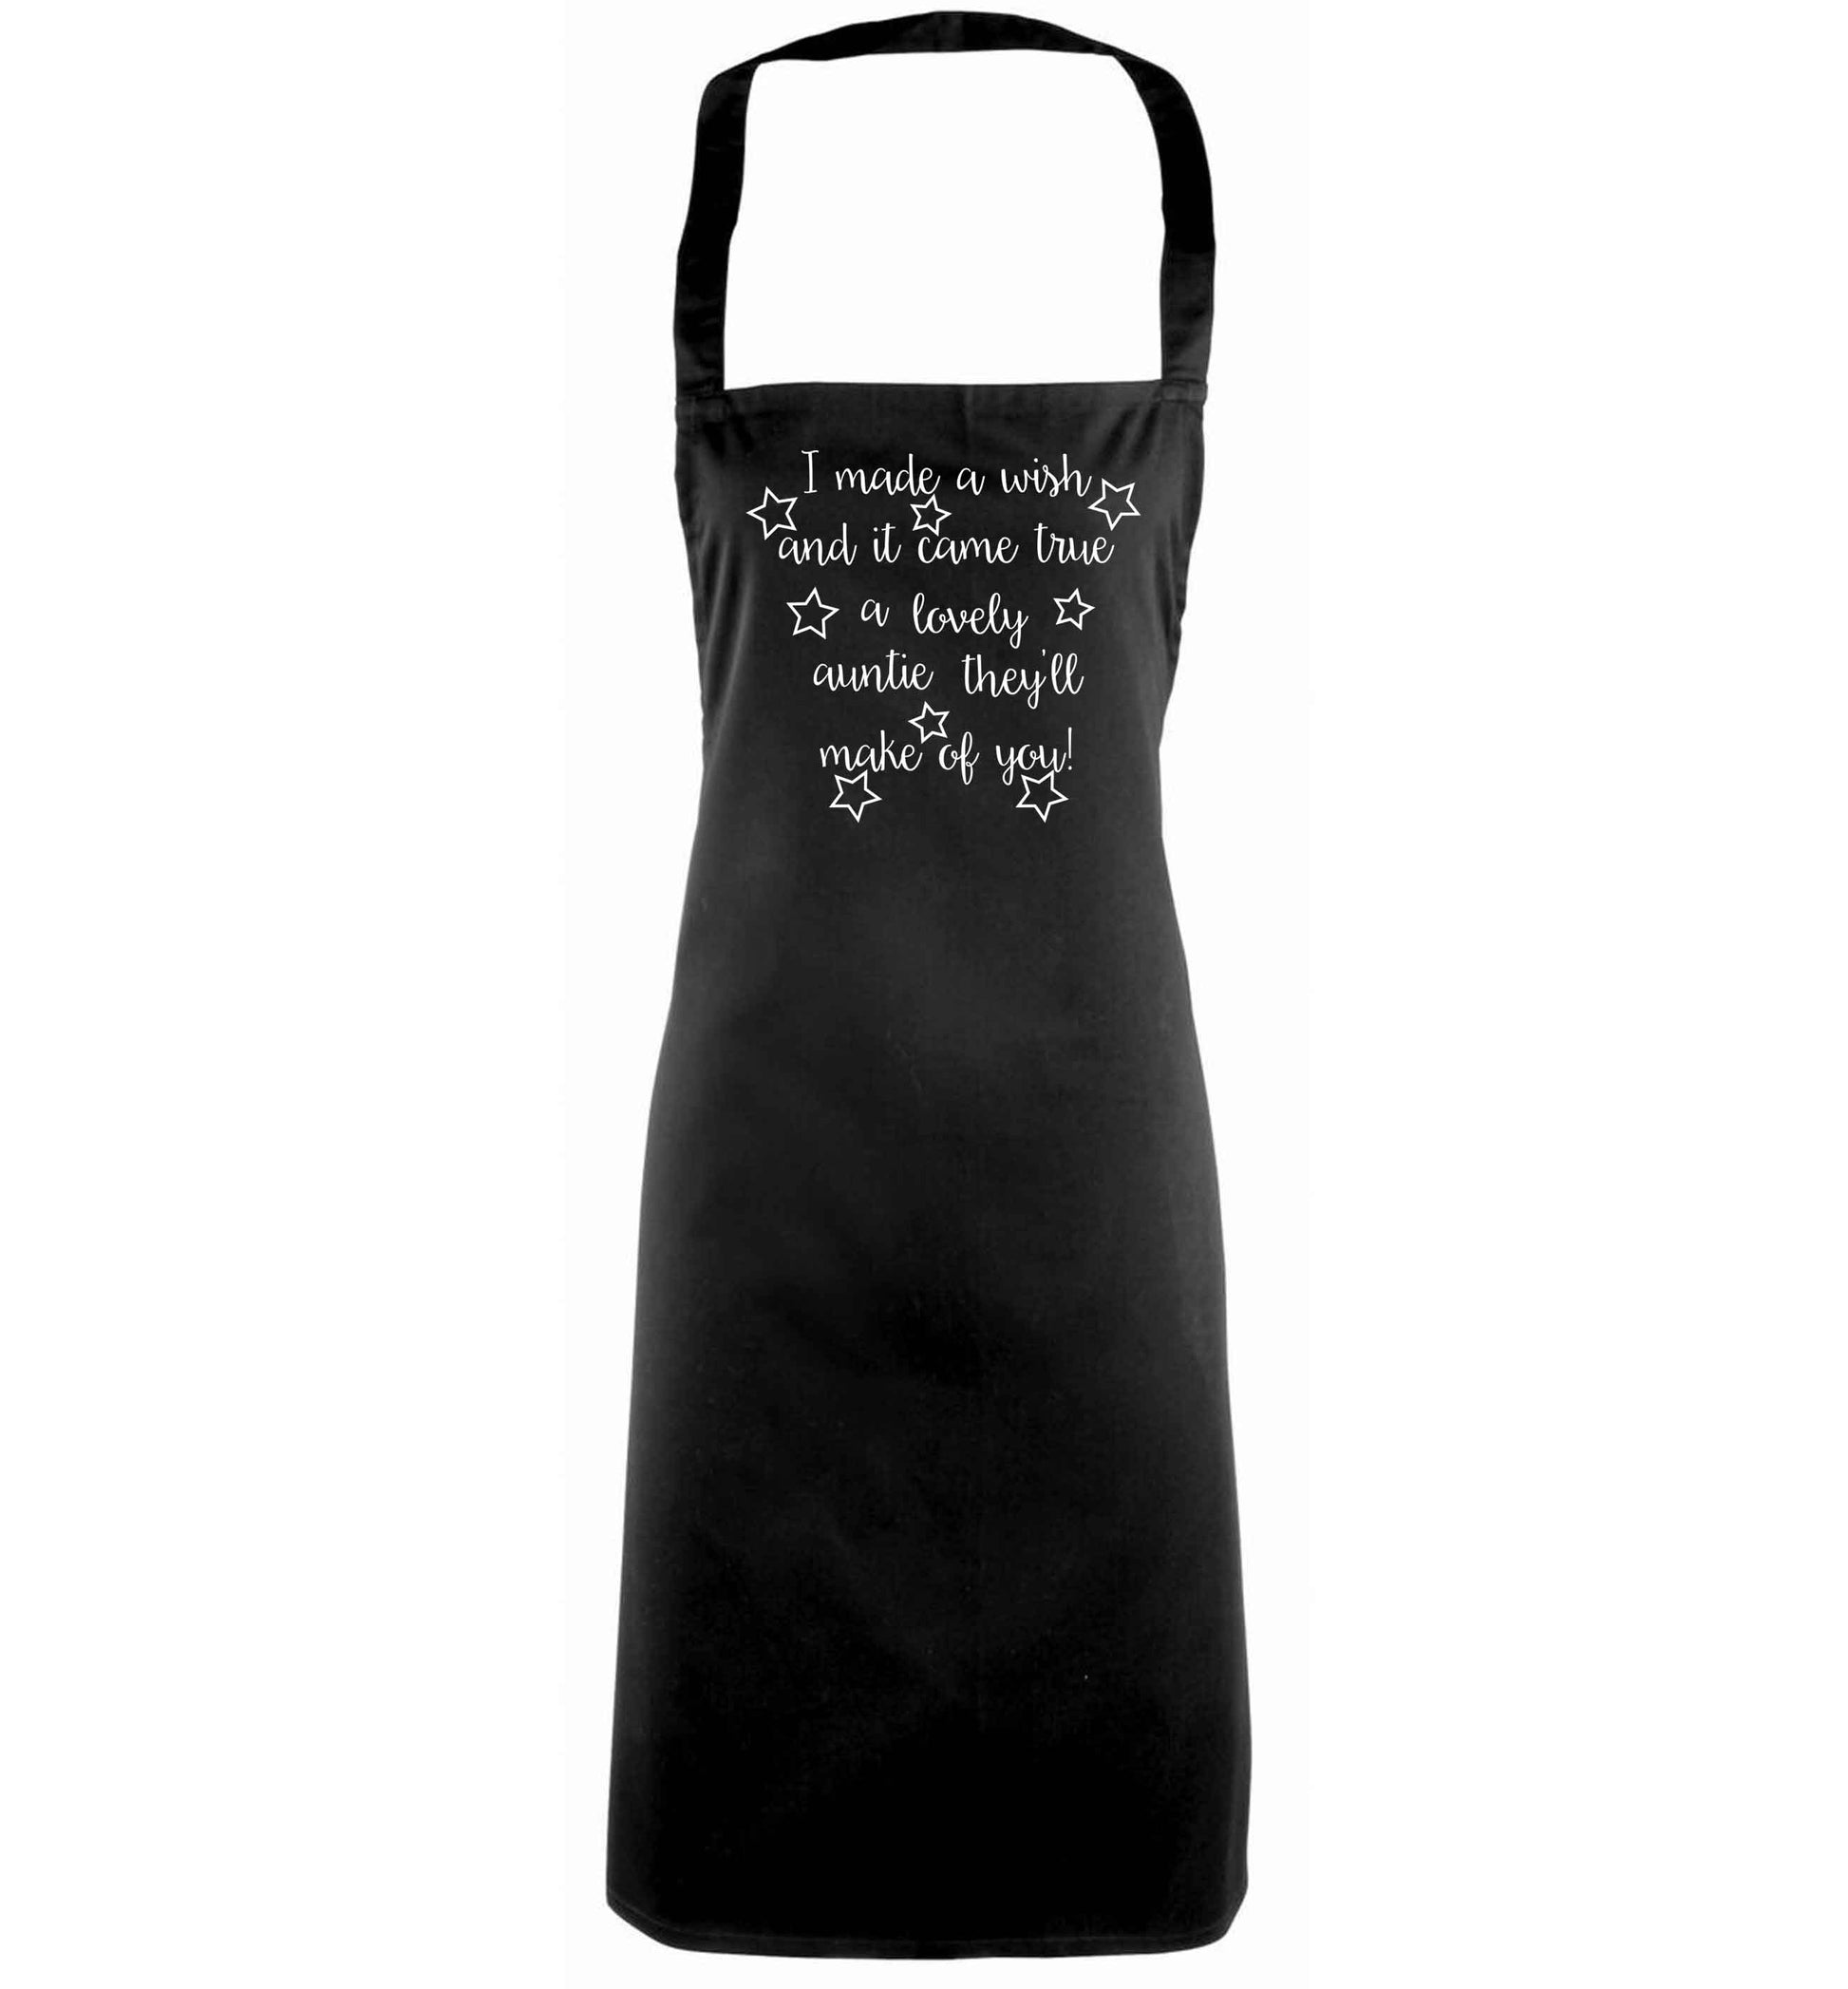 I made a wish and it came true a lovely auntie they'll make of you! black apron